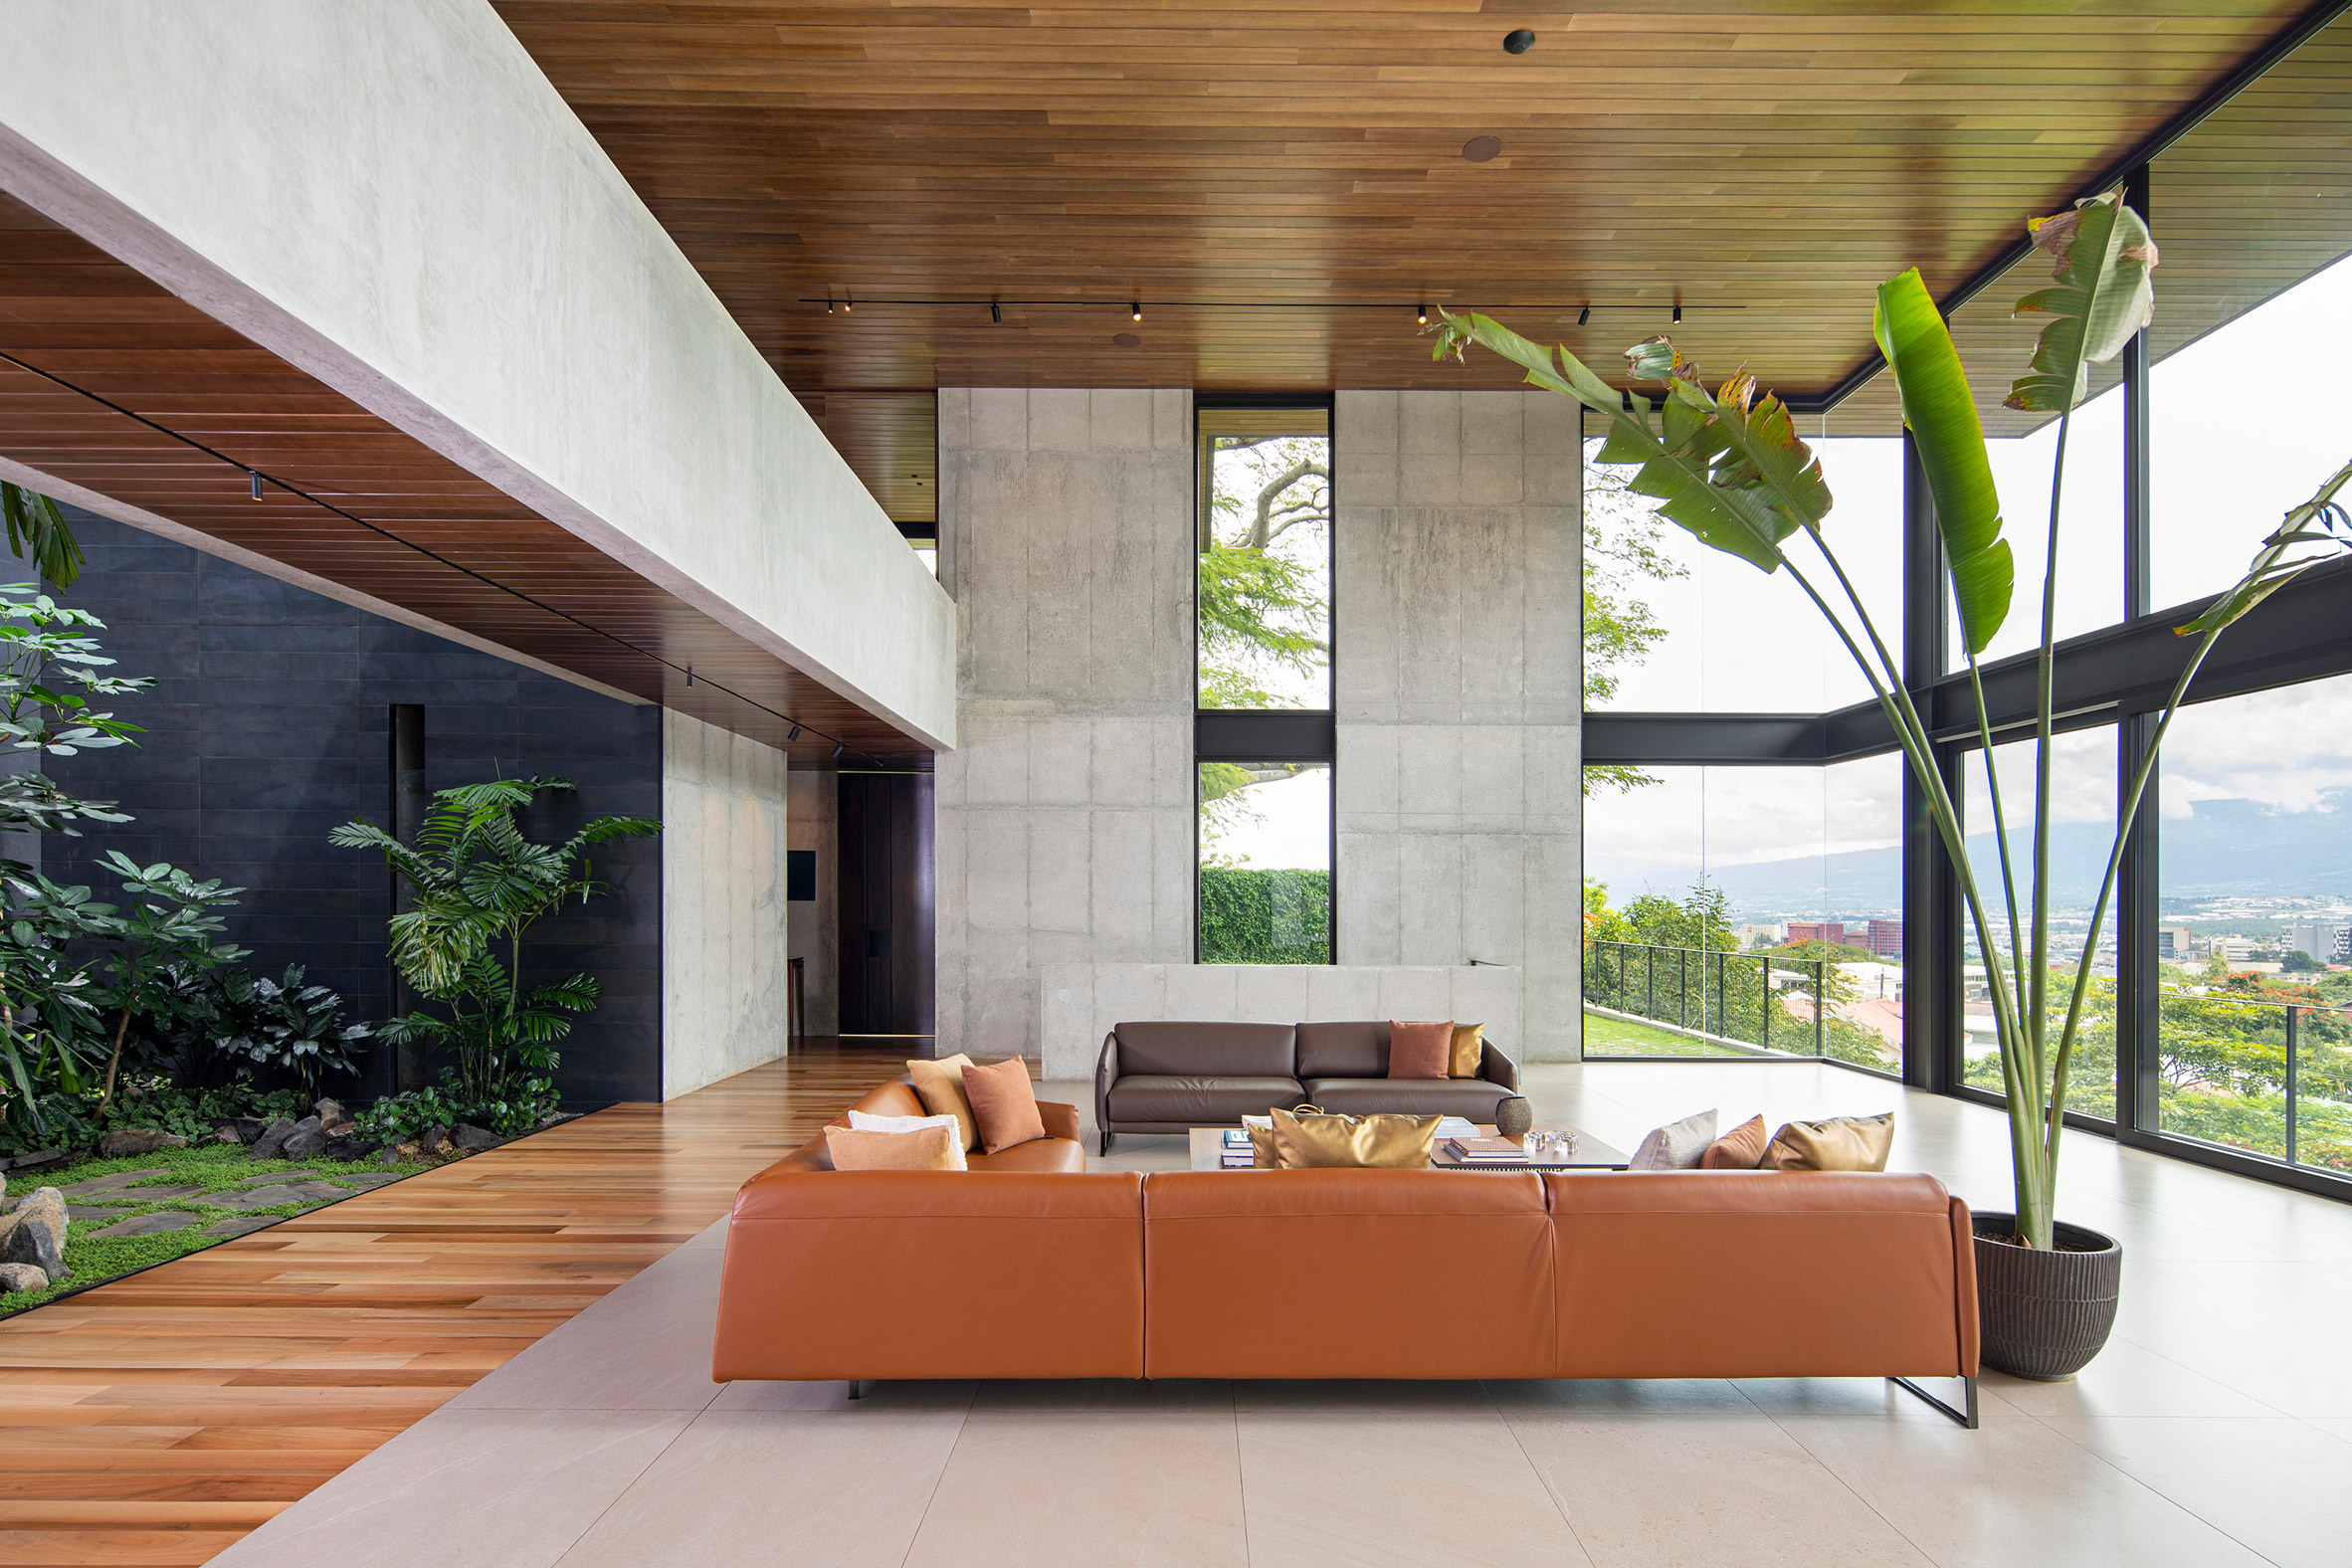 Open plan living area of house in Costa Rica